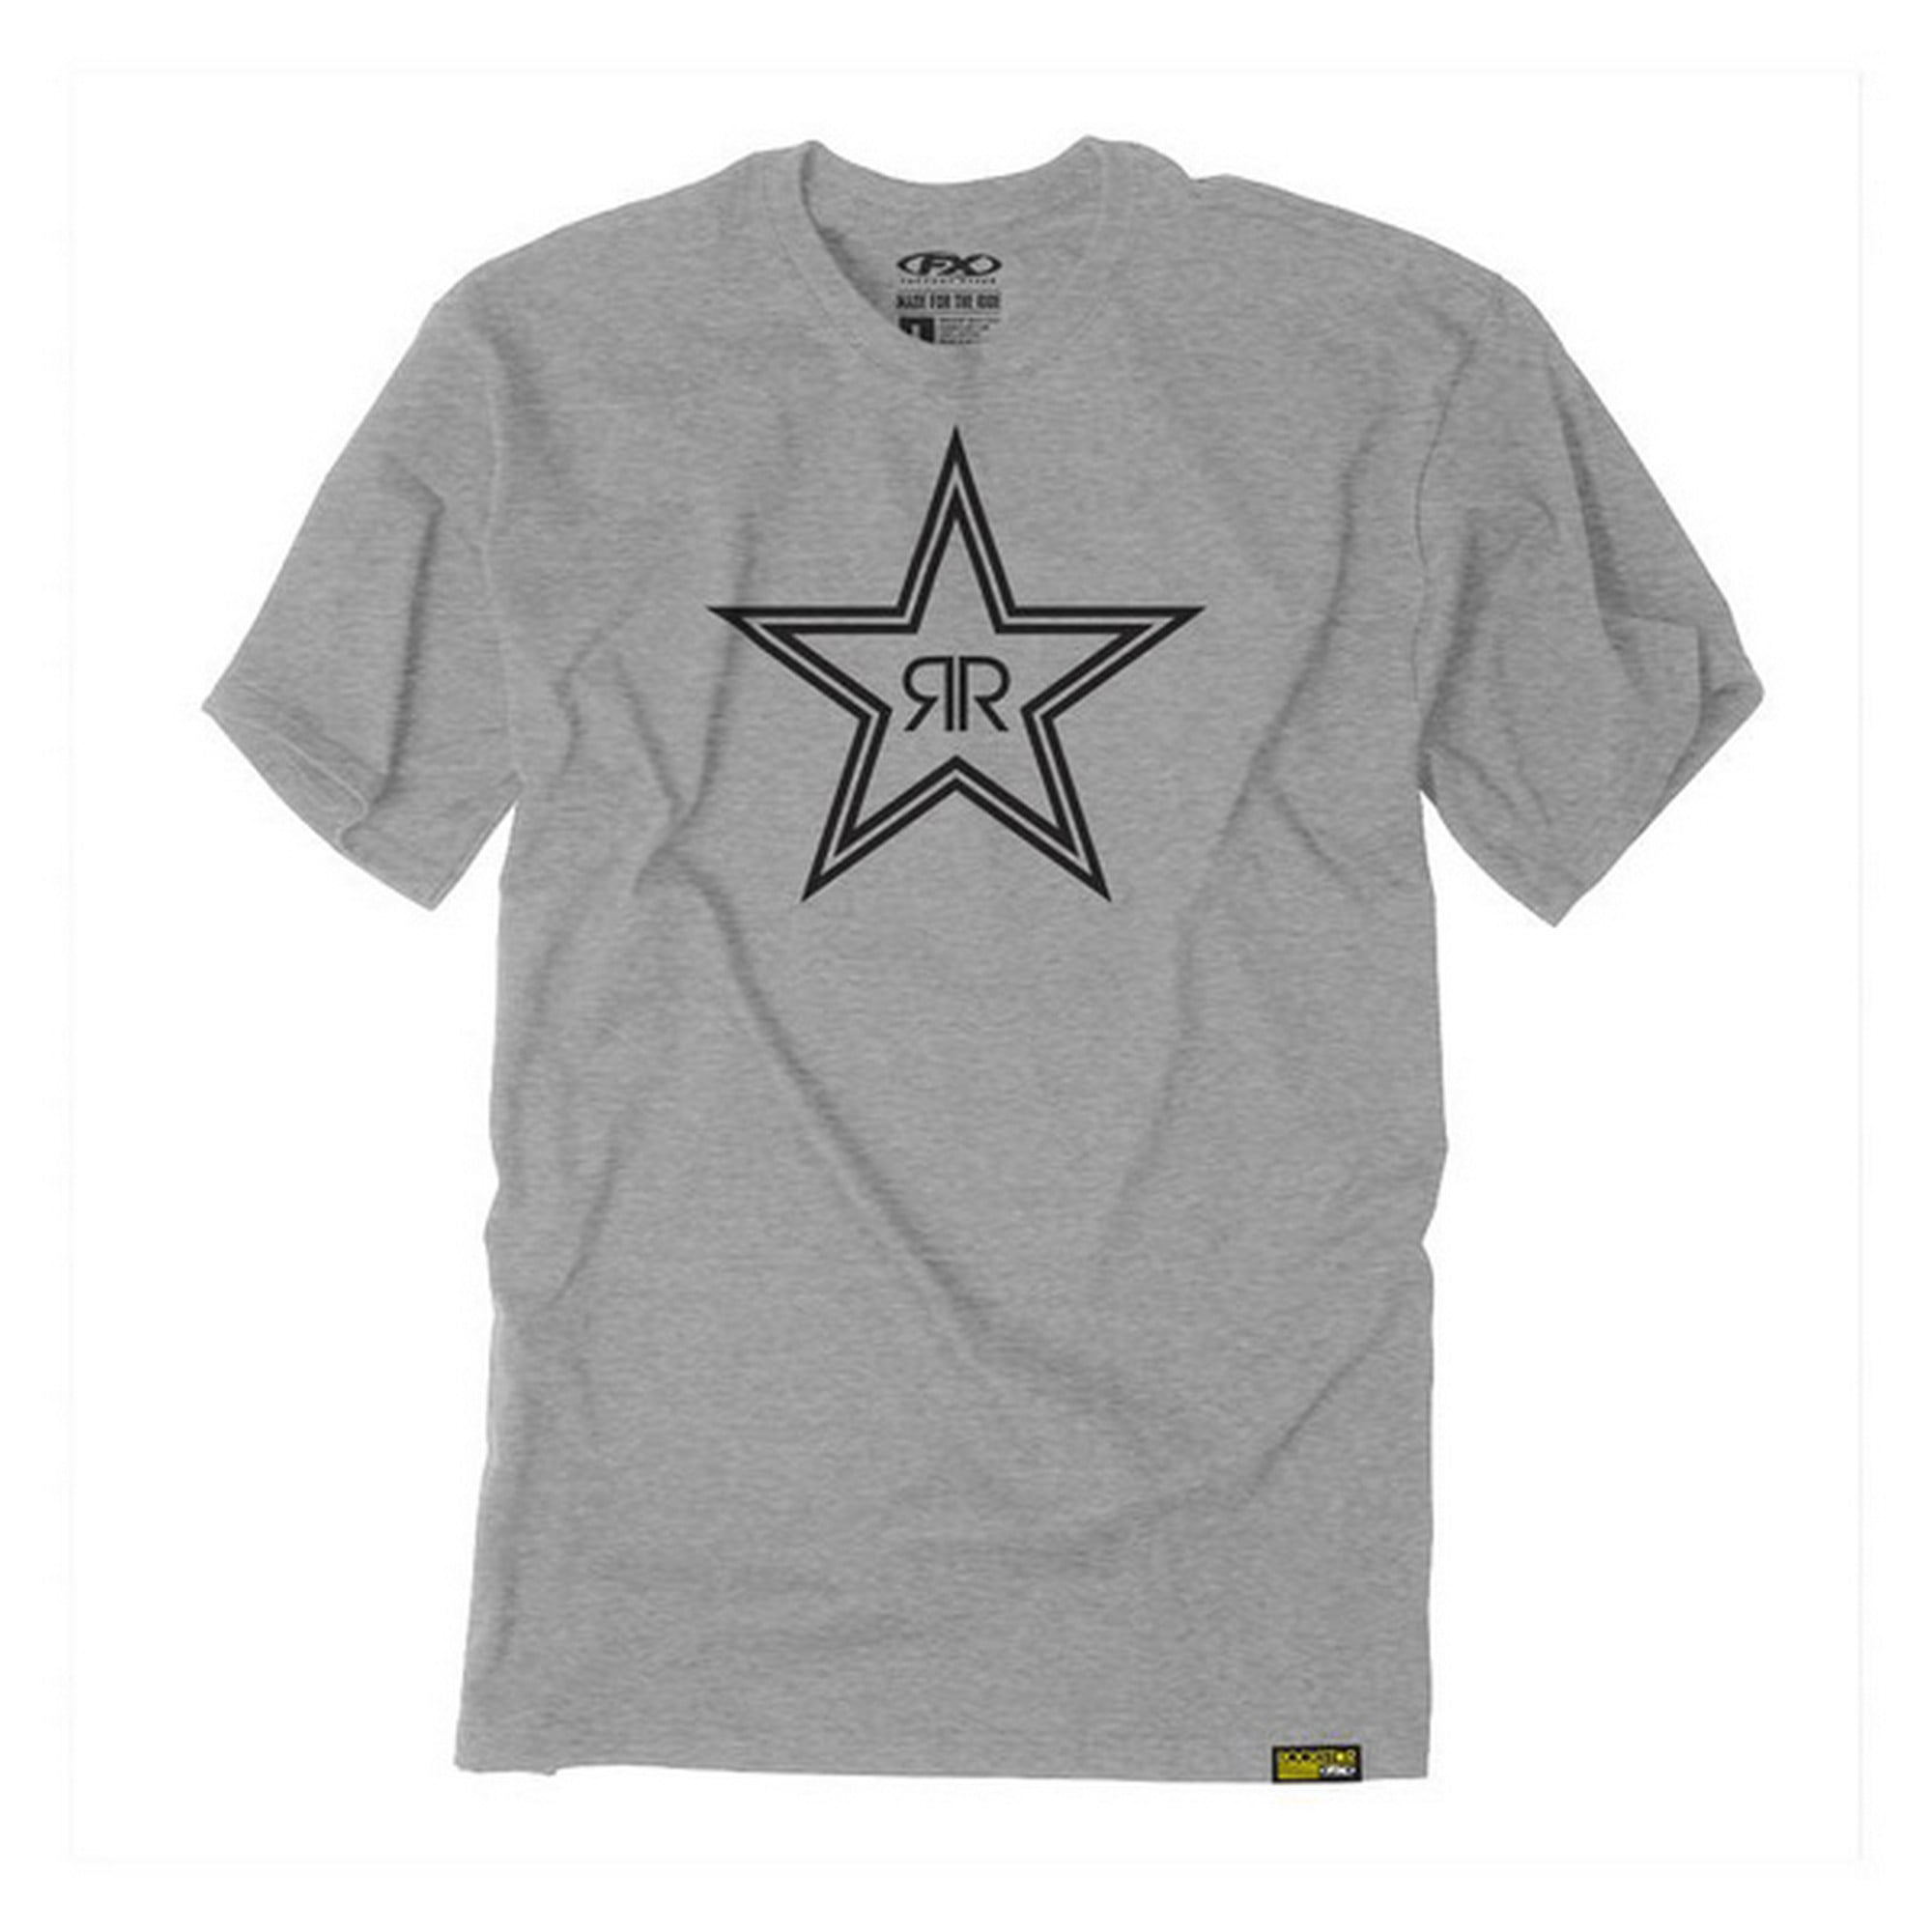 Thor Star Racing Unite T-Shirt M Heather Gray or Navy L S XL or 2XL 